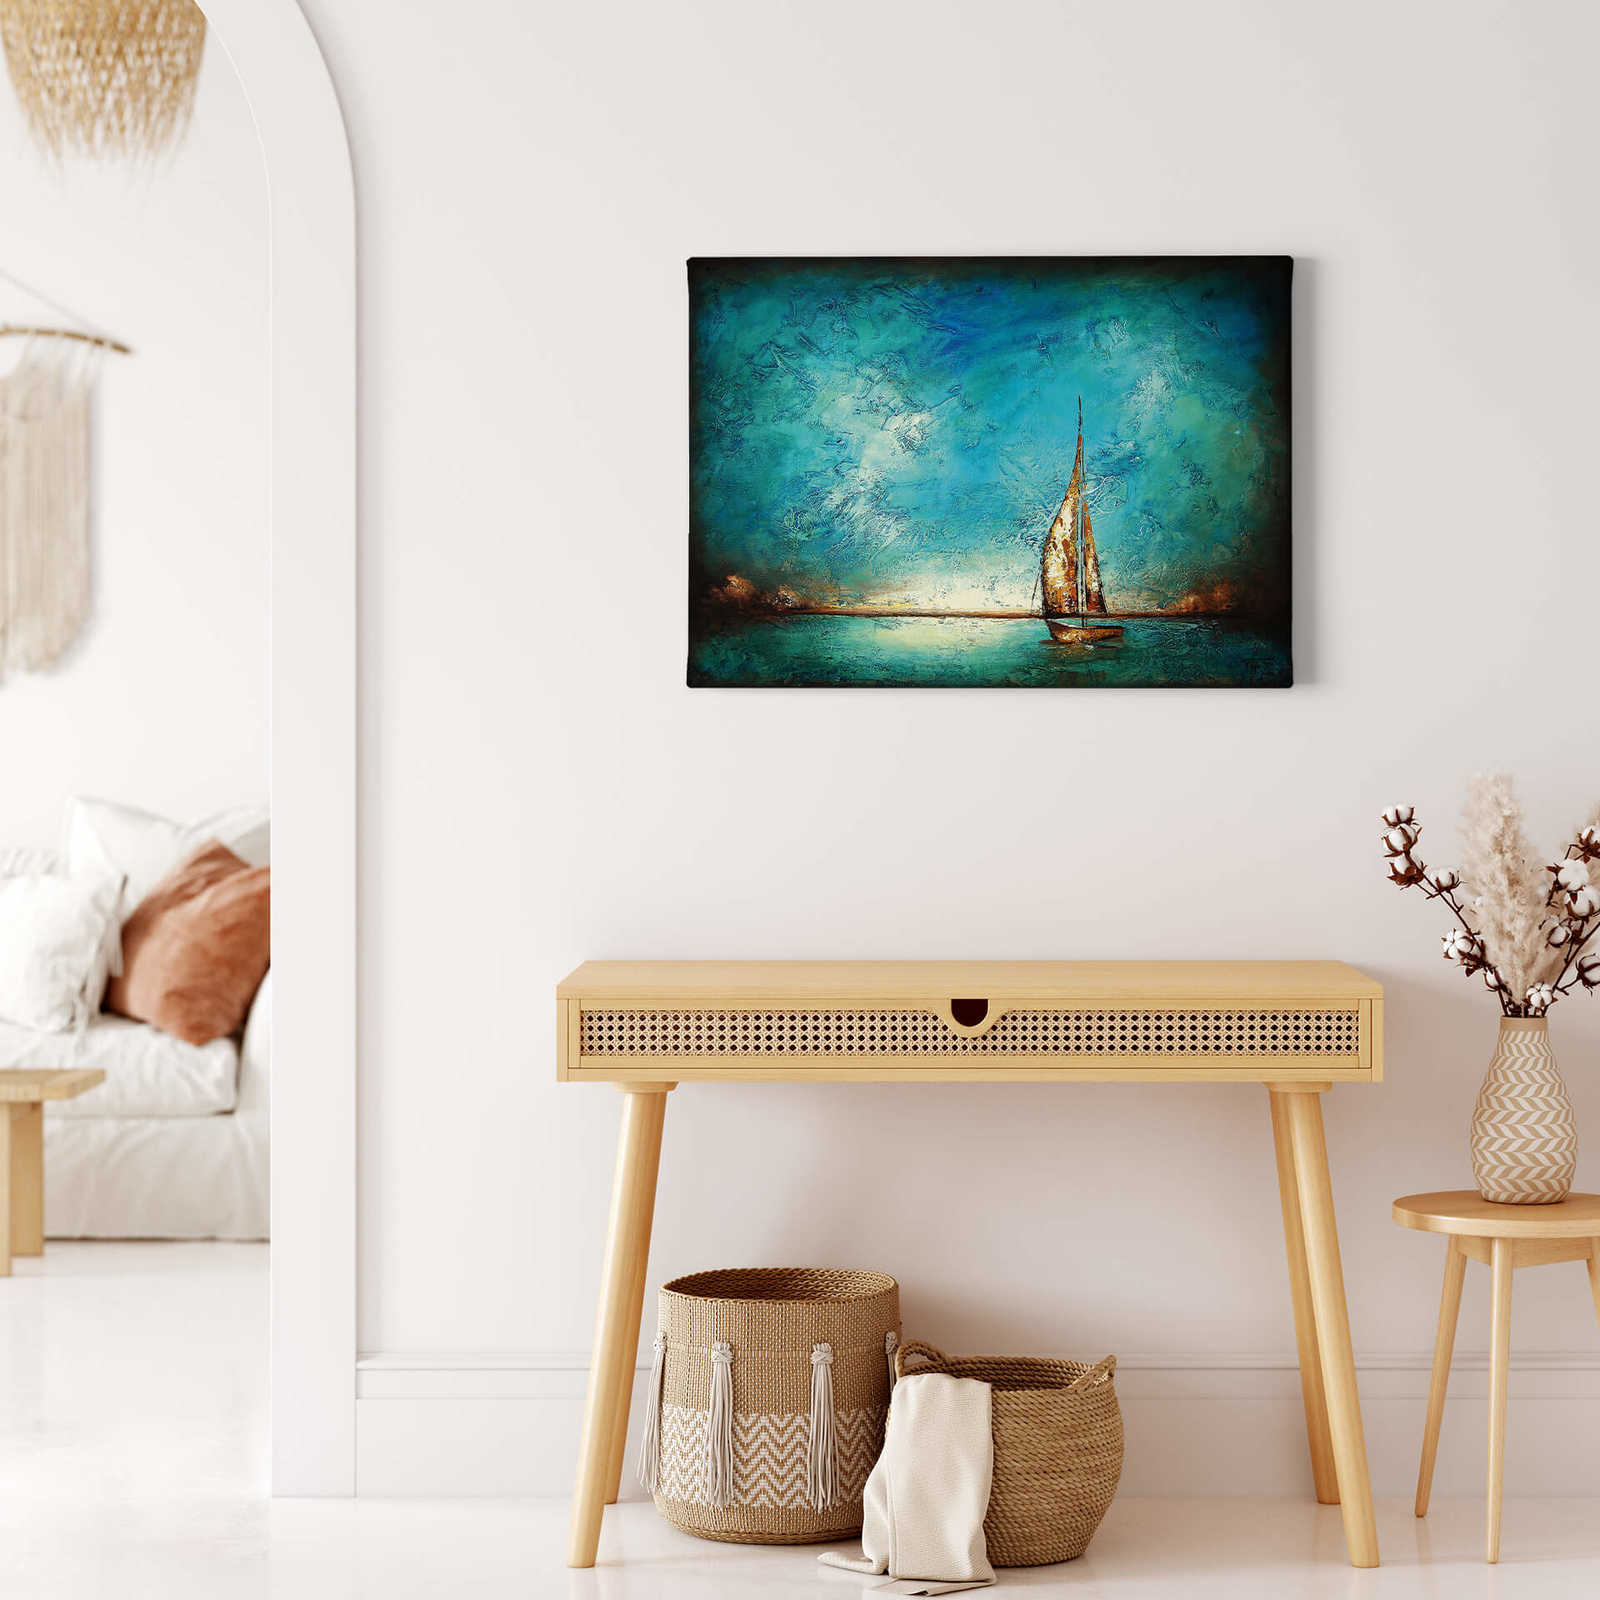             Abstract art canvas print "Loneliness" by Fedrau
        